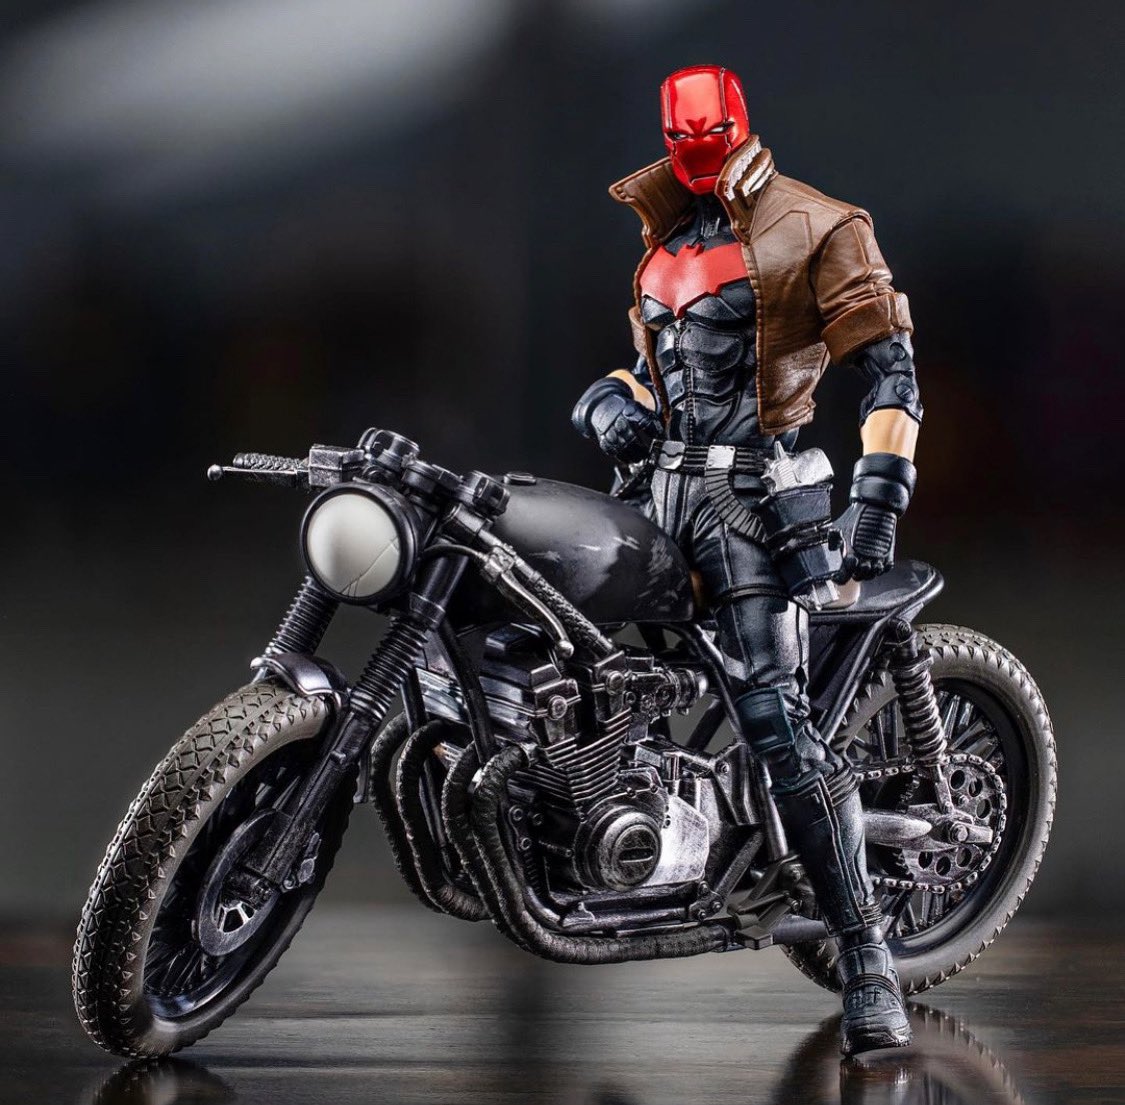 Red Hood on the Drifter motorcycle by @mcfarlane_toys_official.

#redhood #jasontodd #batman #driftermotorcycle #batfamily #darkknight #dcmultiverse #dccollectibles #dccomics #thebatman #dcuniverse #dccollection #dccollector #actionfigure #actionfigurephotography